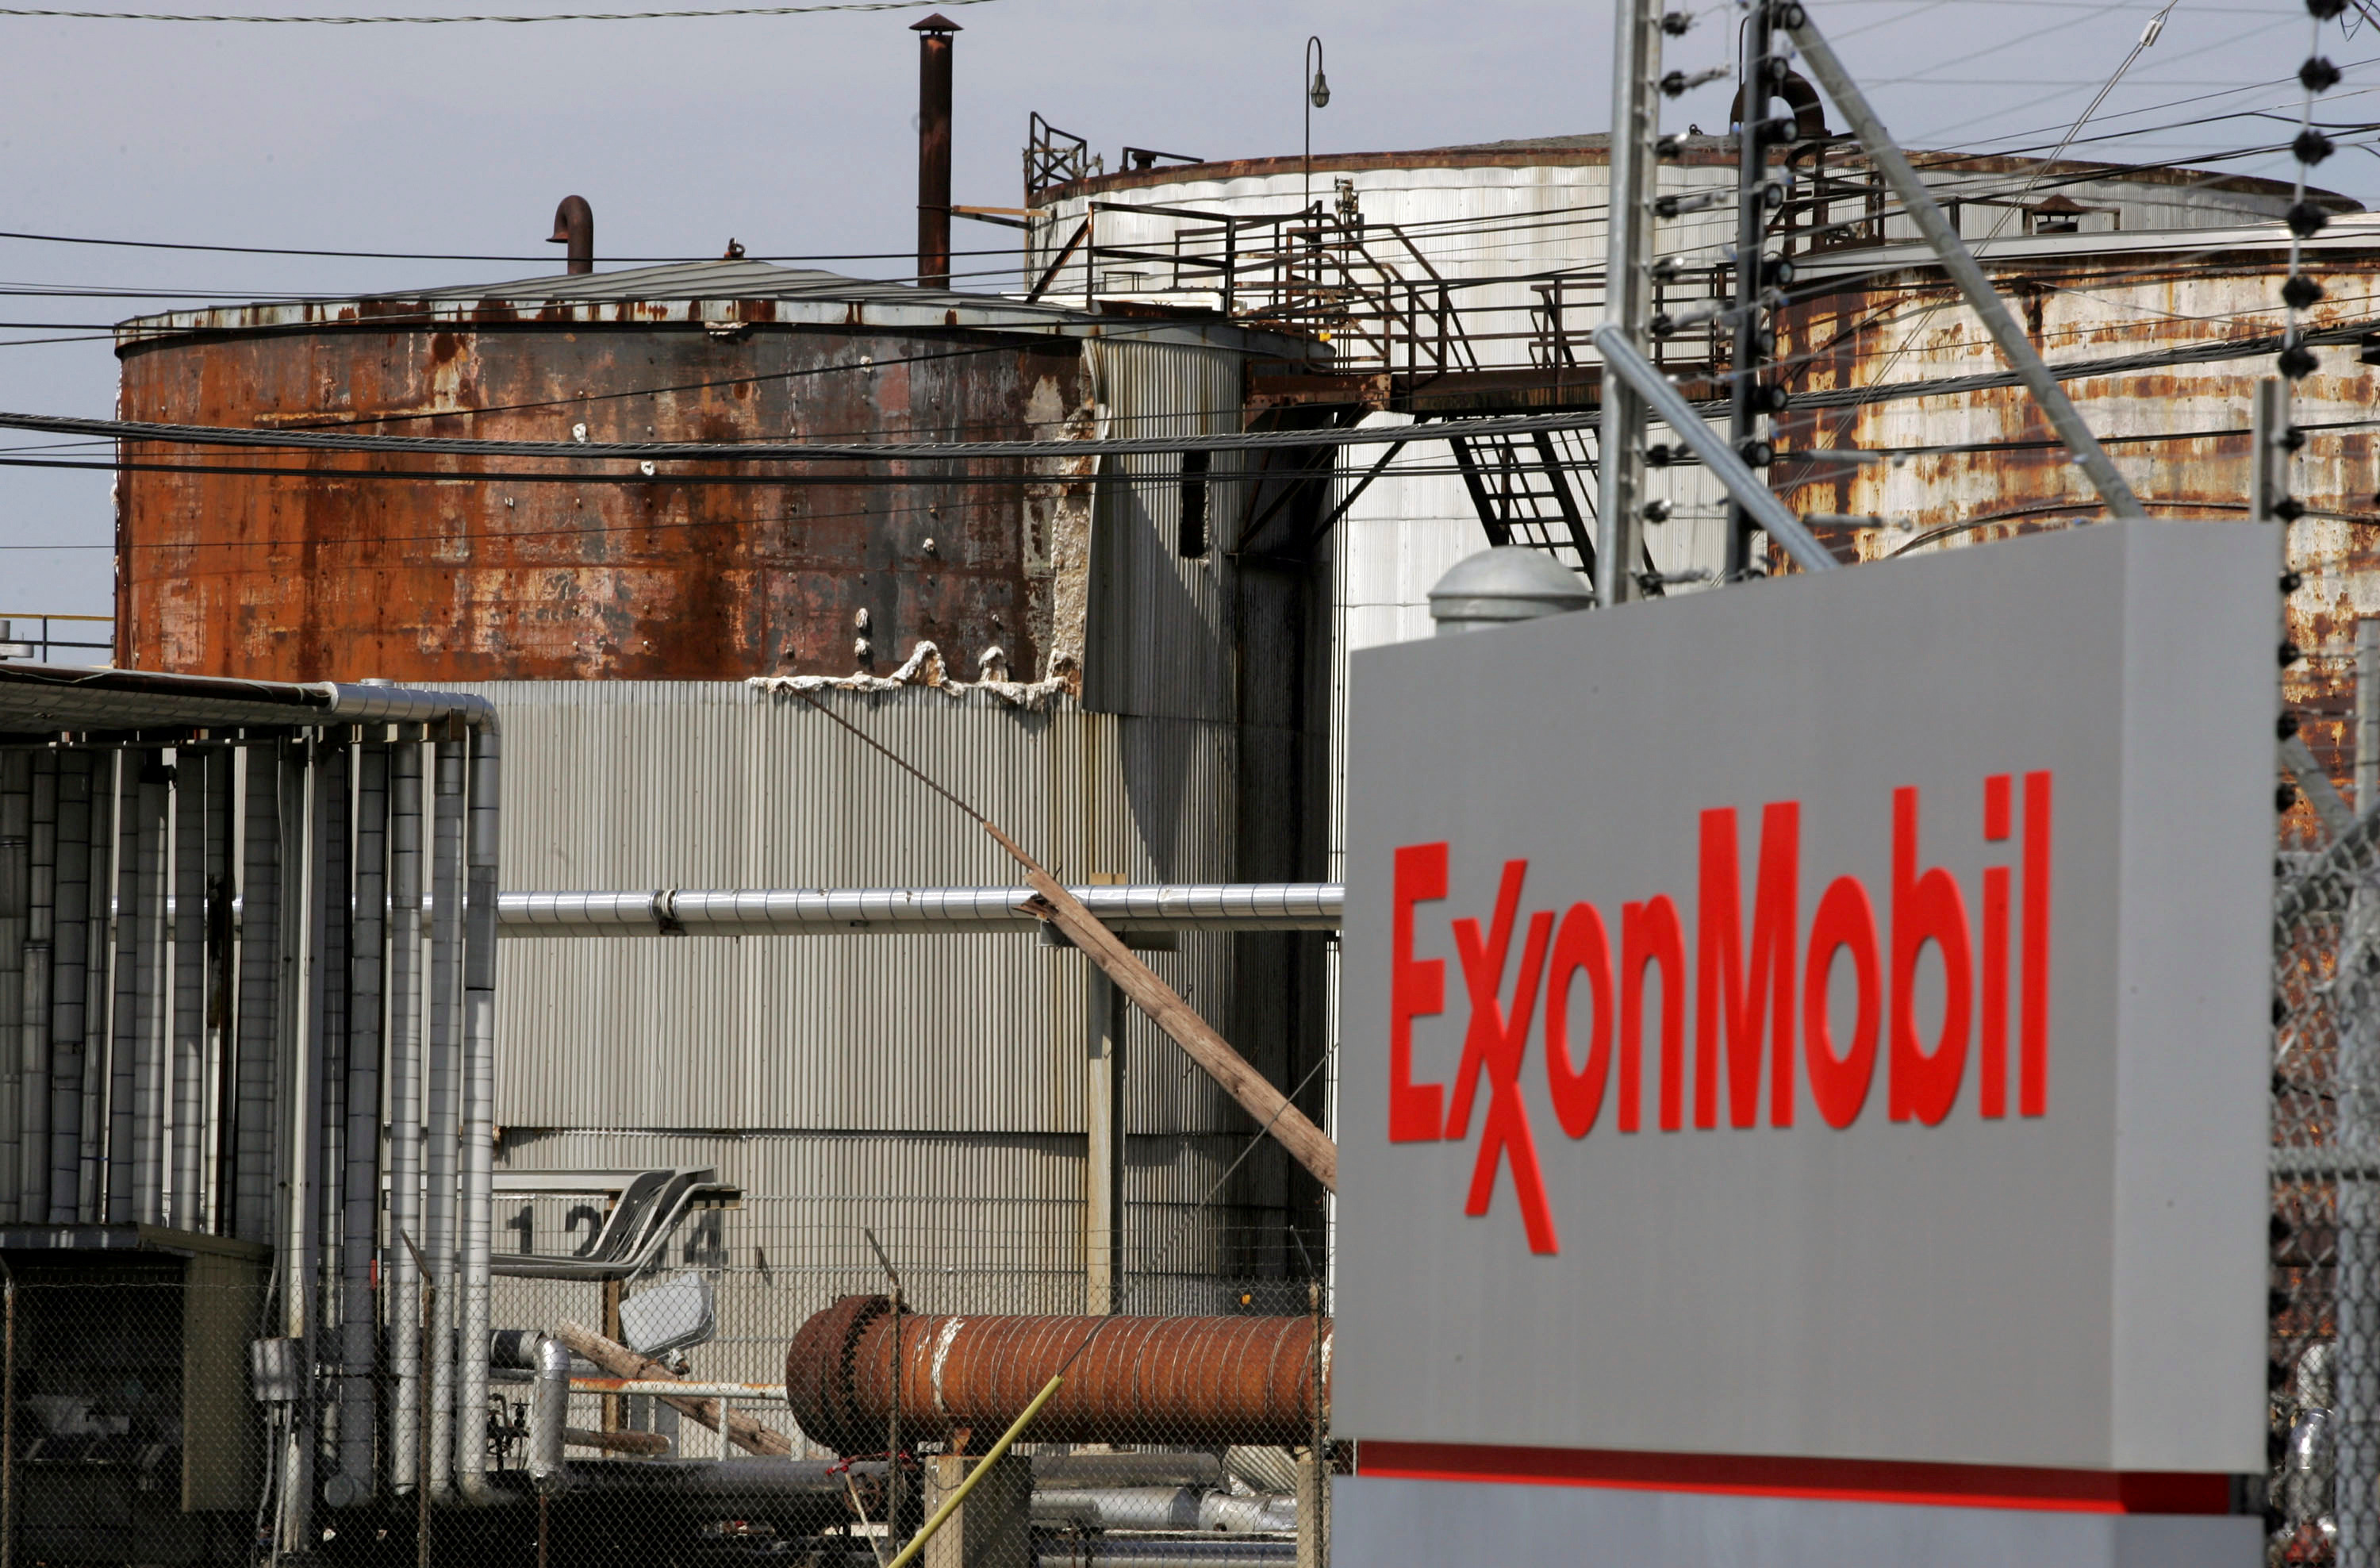 A view of the Exxon Mobil refinery in Baytown, Texas September 15, 2008. REUTERS/Jessica Rinaldi